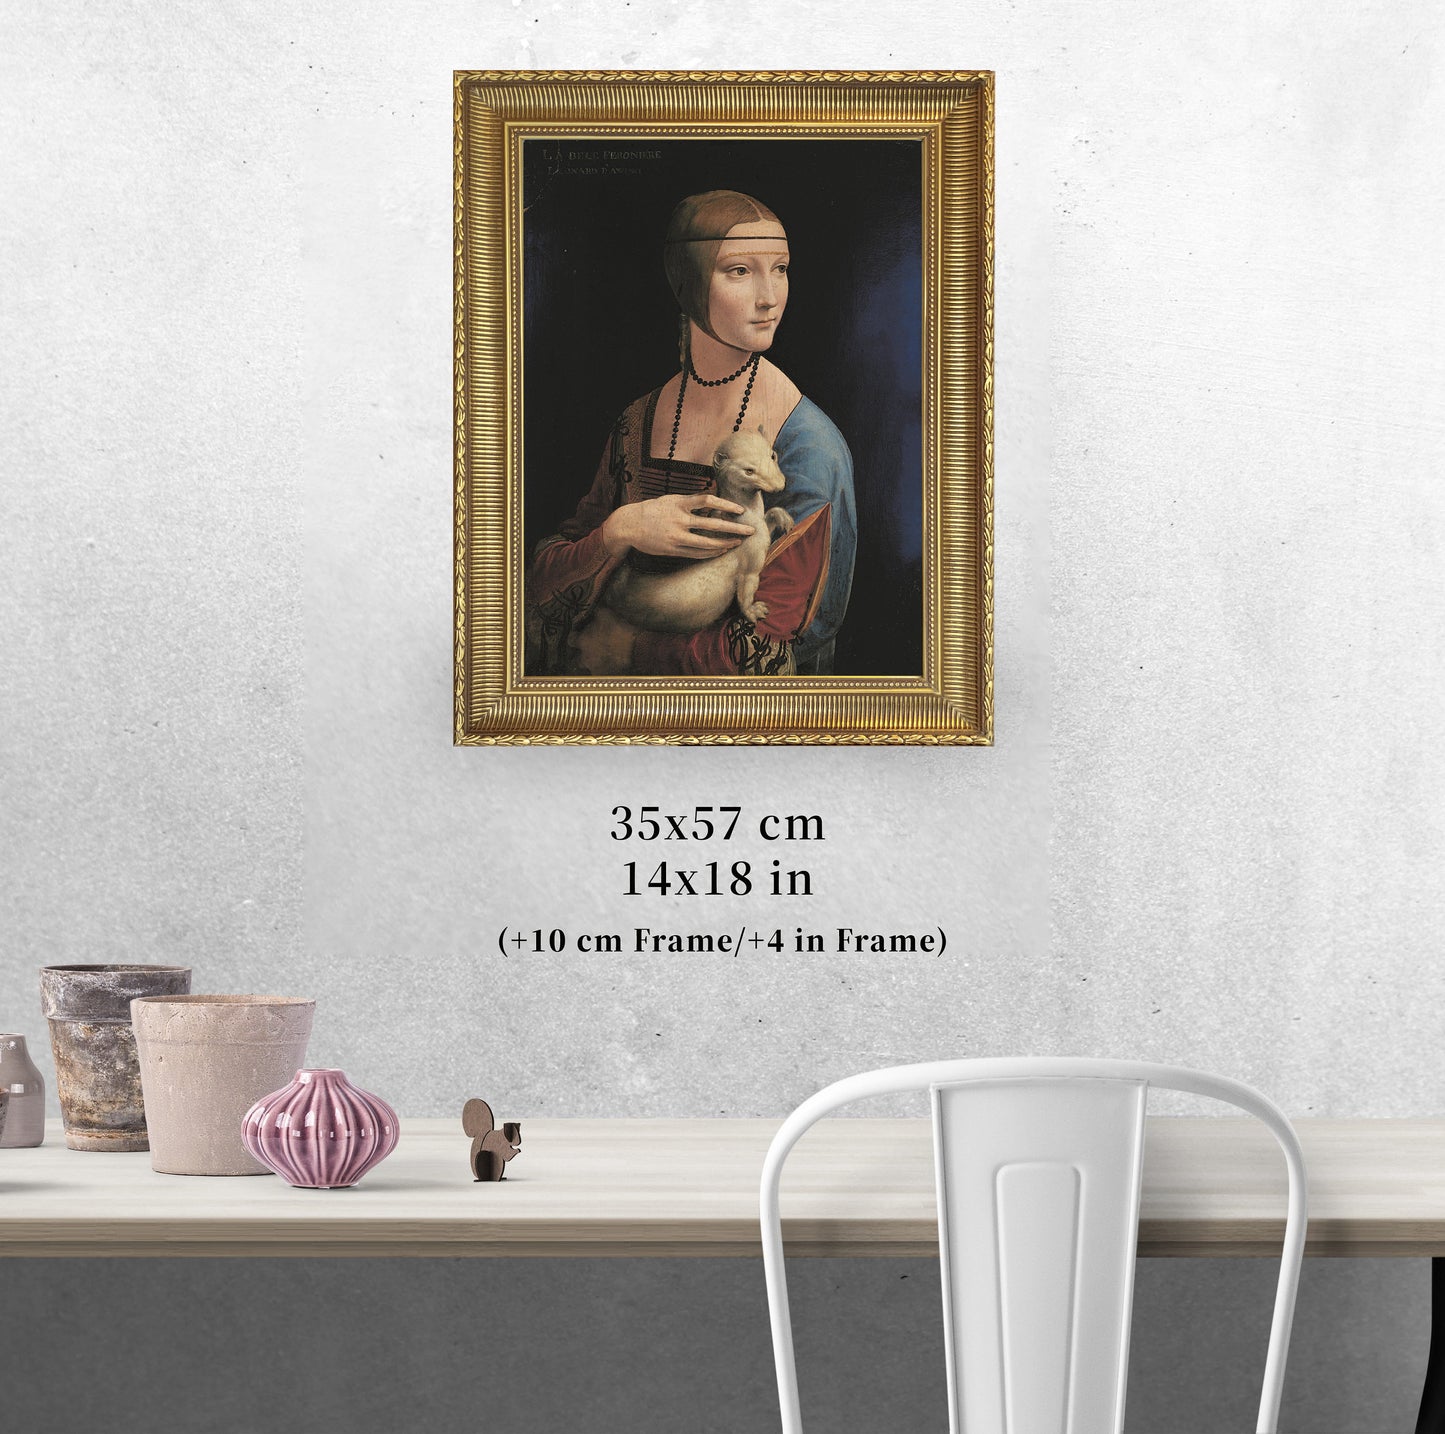 Lady with an Ermine by Leonardo Da Vinci, 3d Printed with texture and brush strokes looks like original oil-painting, code:046